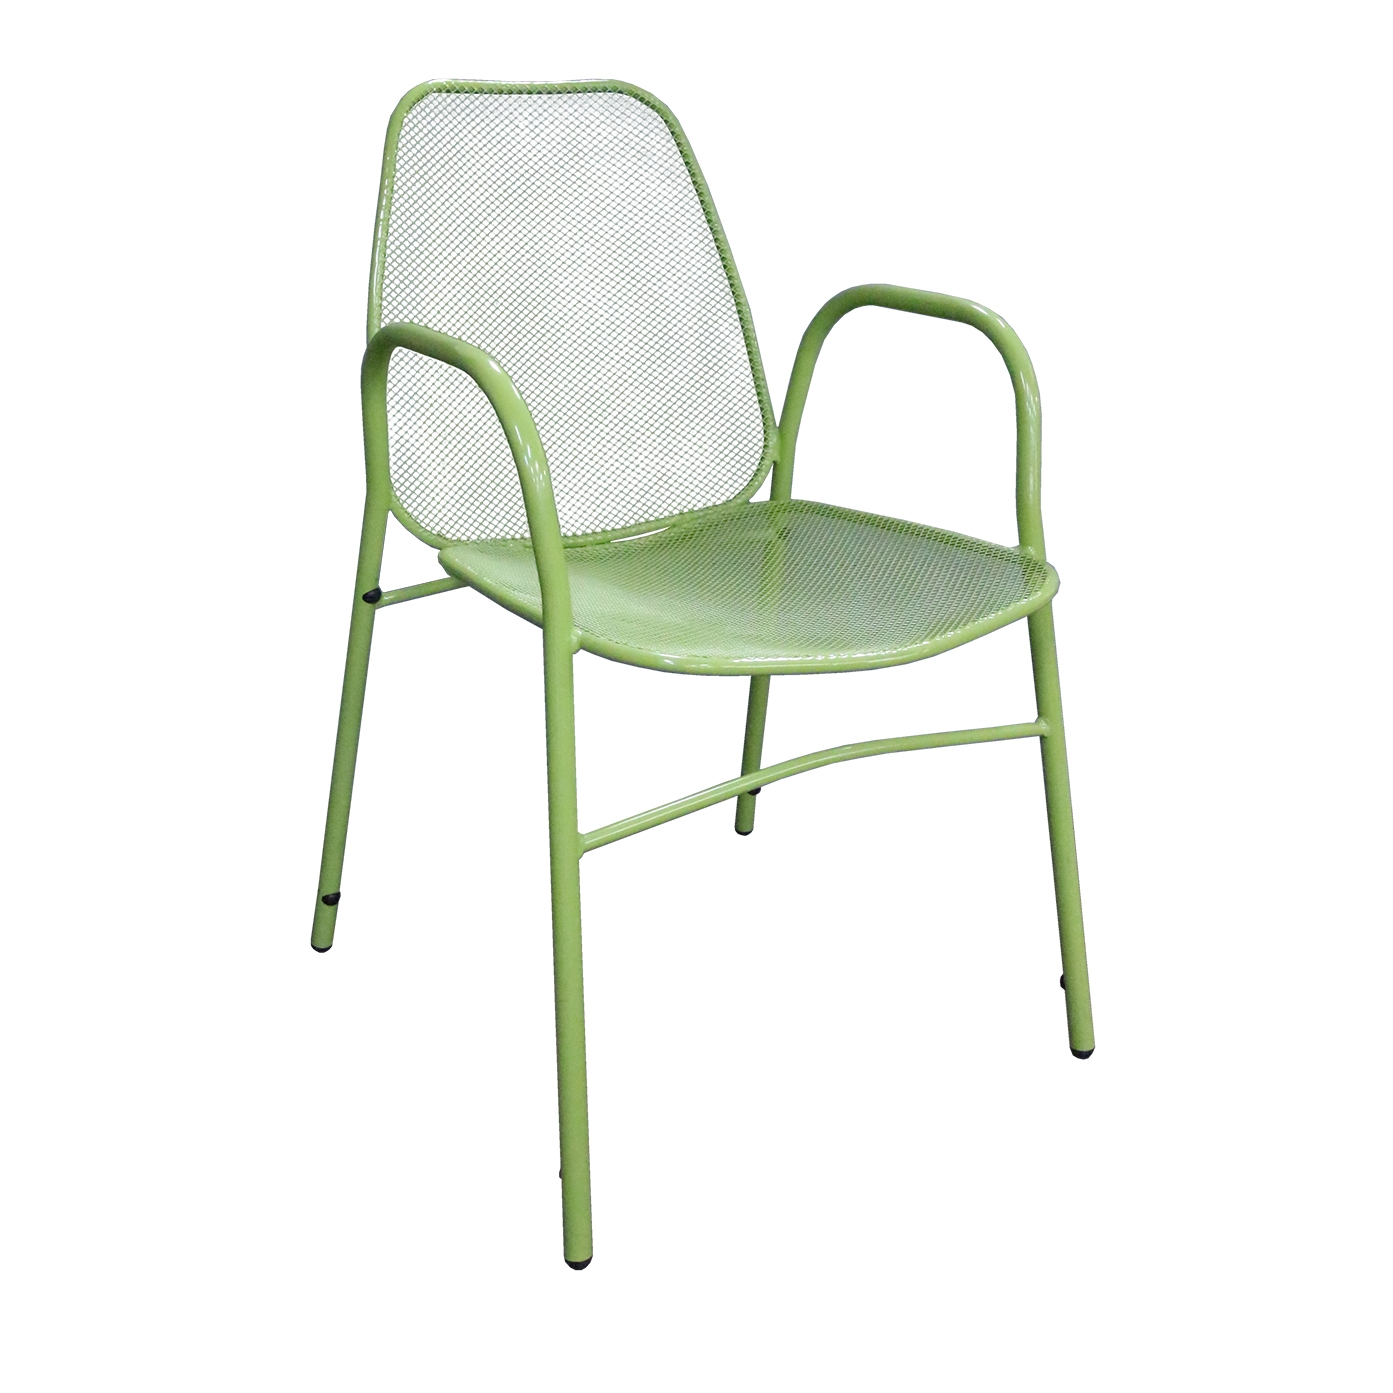 ATS Furniture 96-G Aluminum Outdoor Arm Chair with Meshed Back & Seat